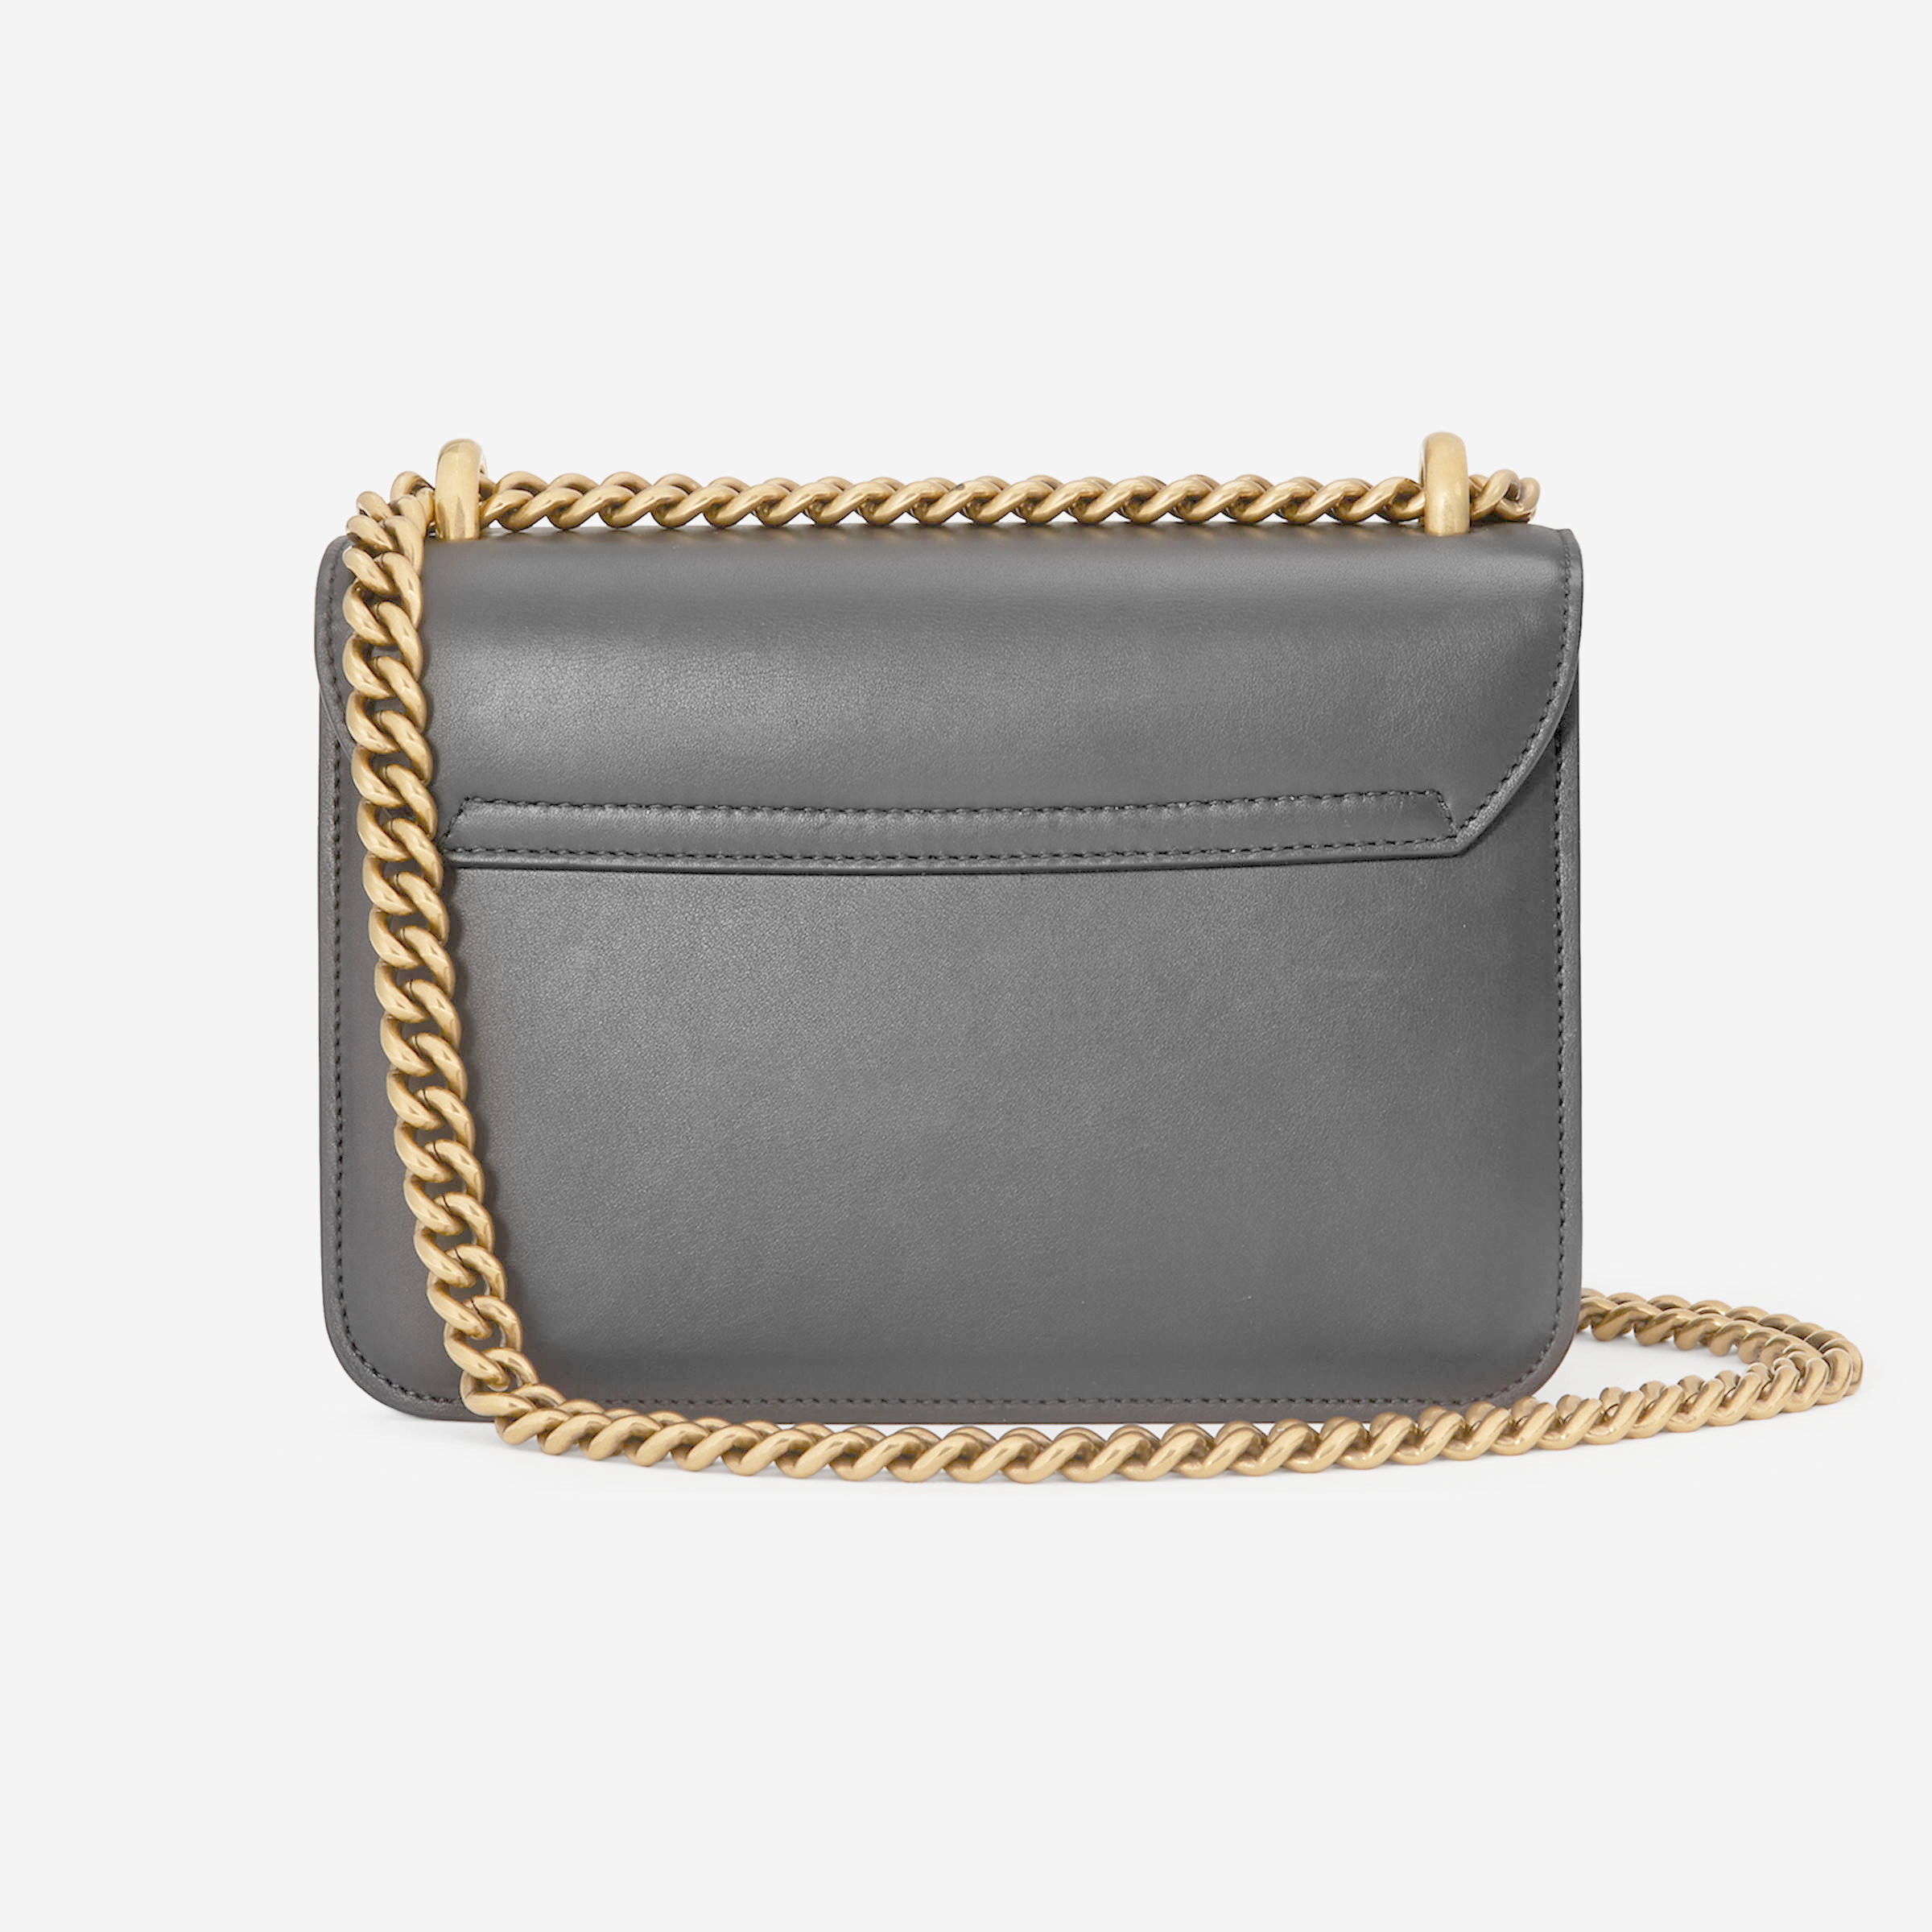 Gucci Leather Chain Shoulder Bag in Black (black leather) | Lyst